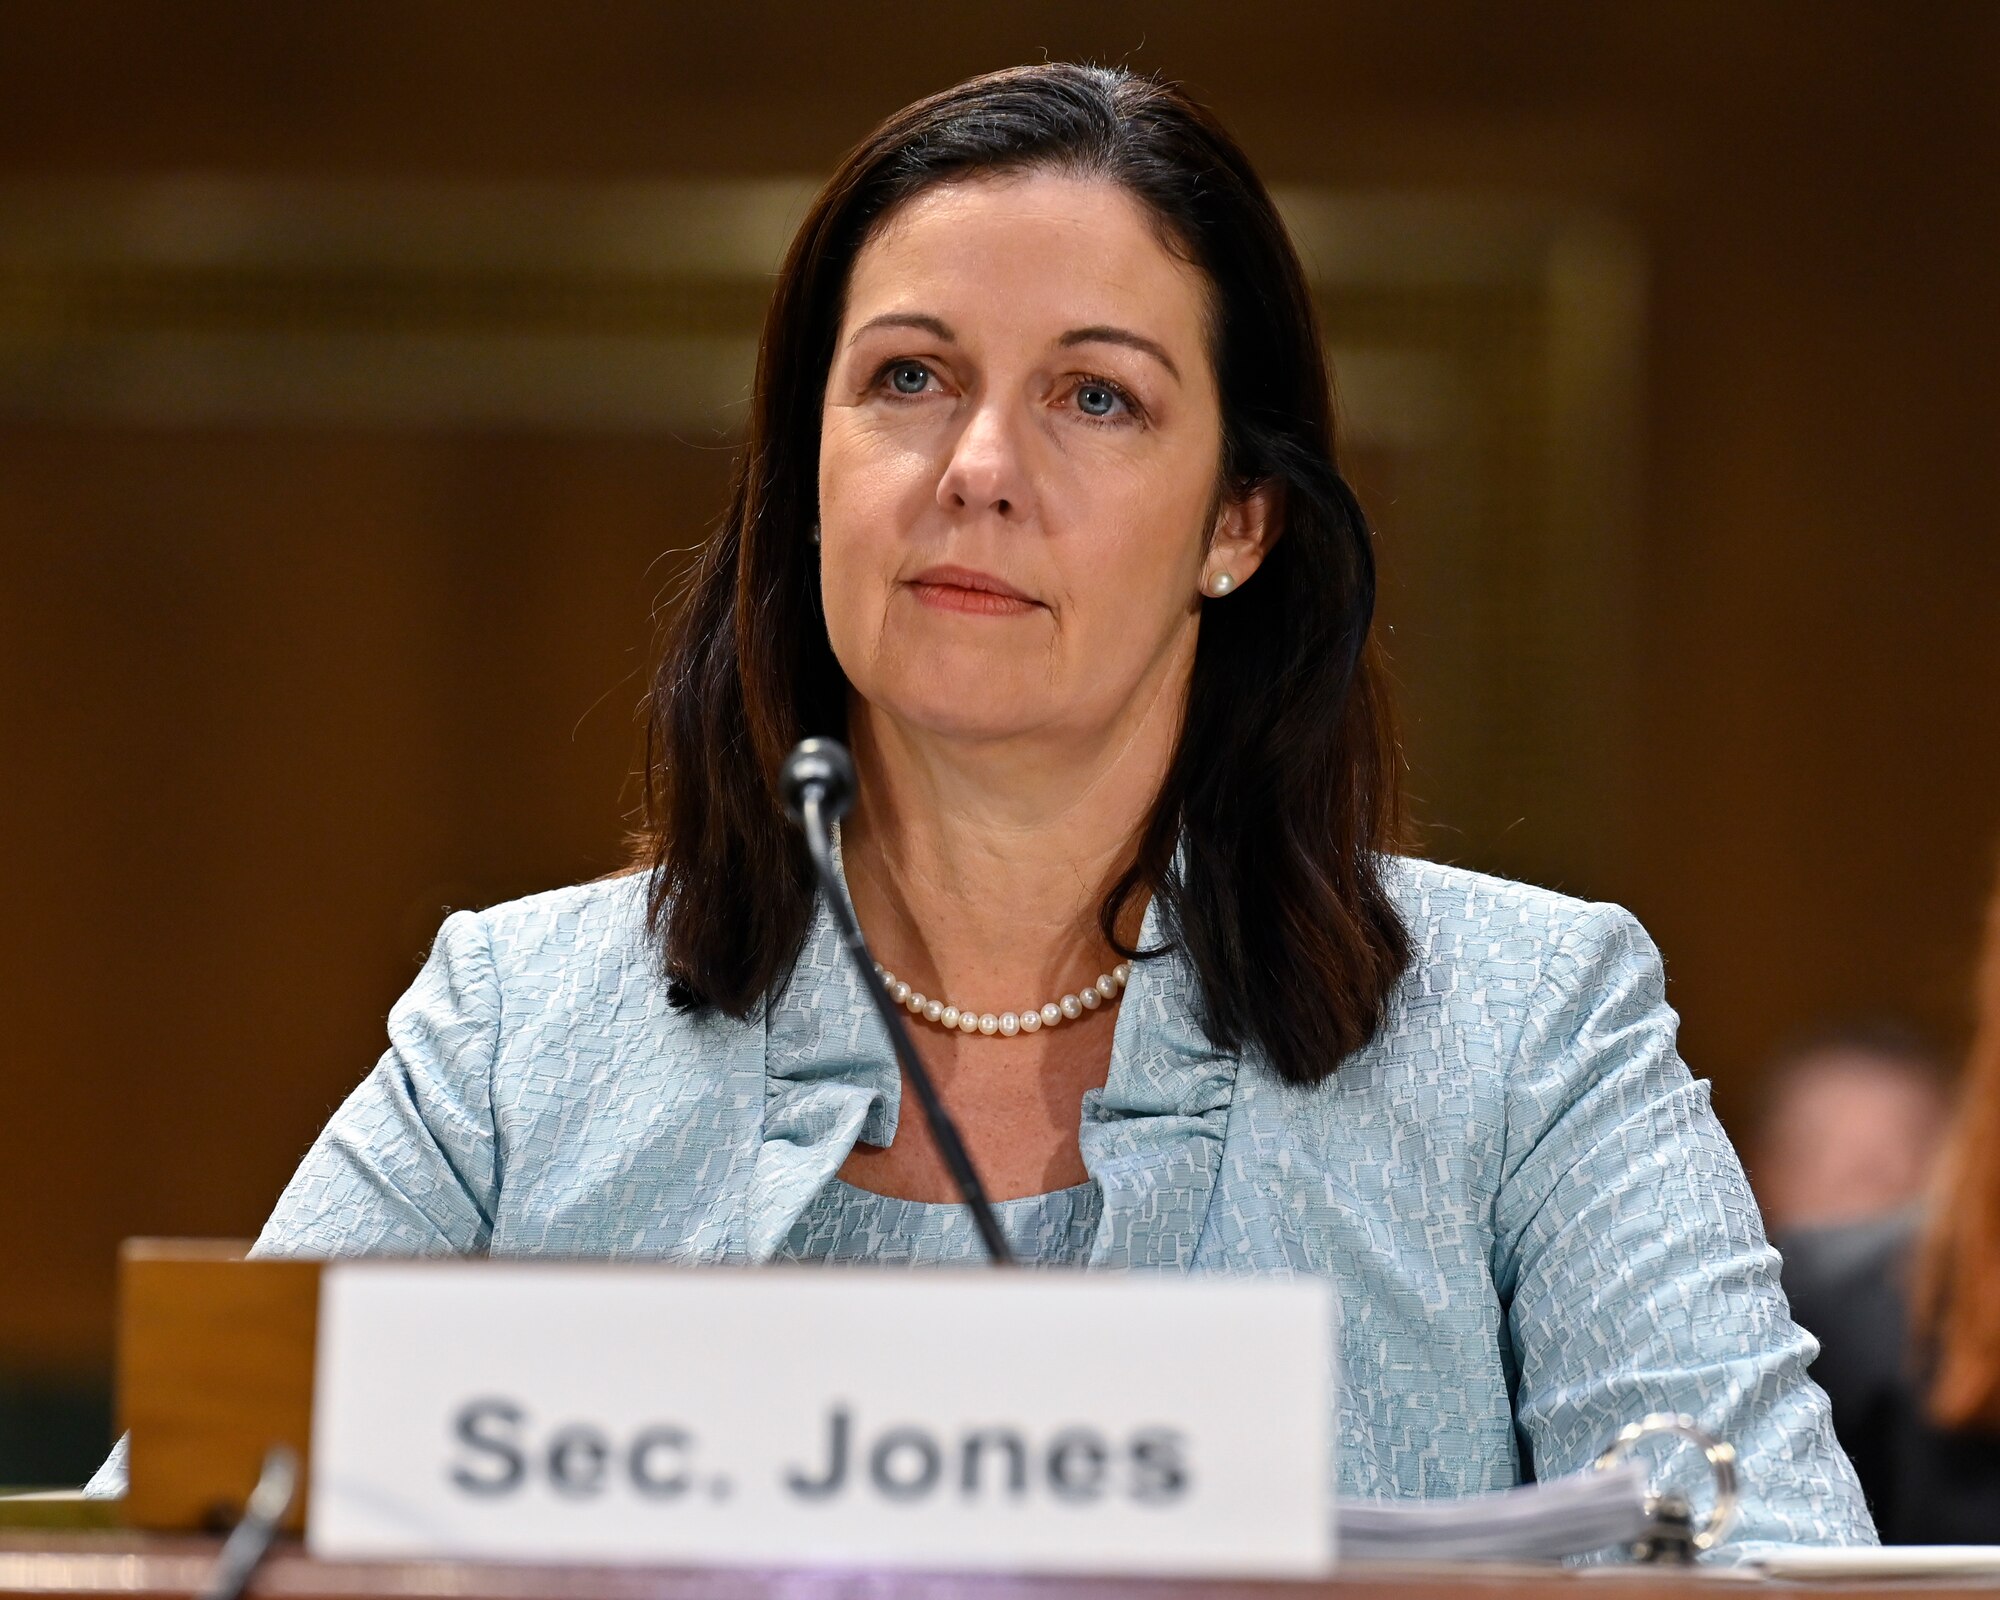 Kristyn Jones, assistant secretary of the Air Force for Financial Management and Comptroller, performing the duties of Under Secretary of the Air Force, testifies before the Senate Armed Services Committee on military recruiting challenges in Washington, D.C., March 22, 2023. (U.S. Air Force photo by Eric Dietrich)